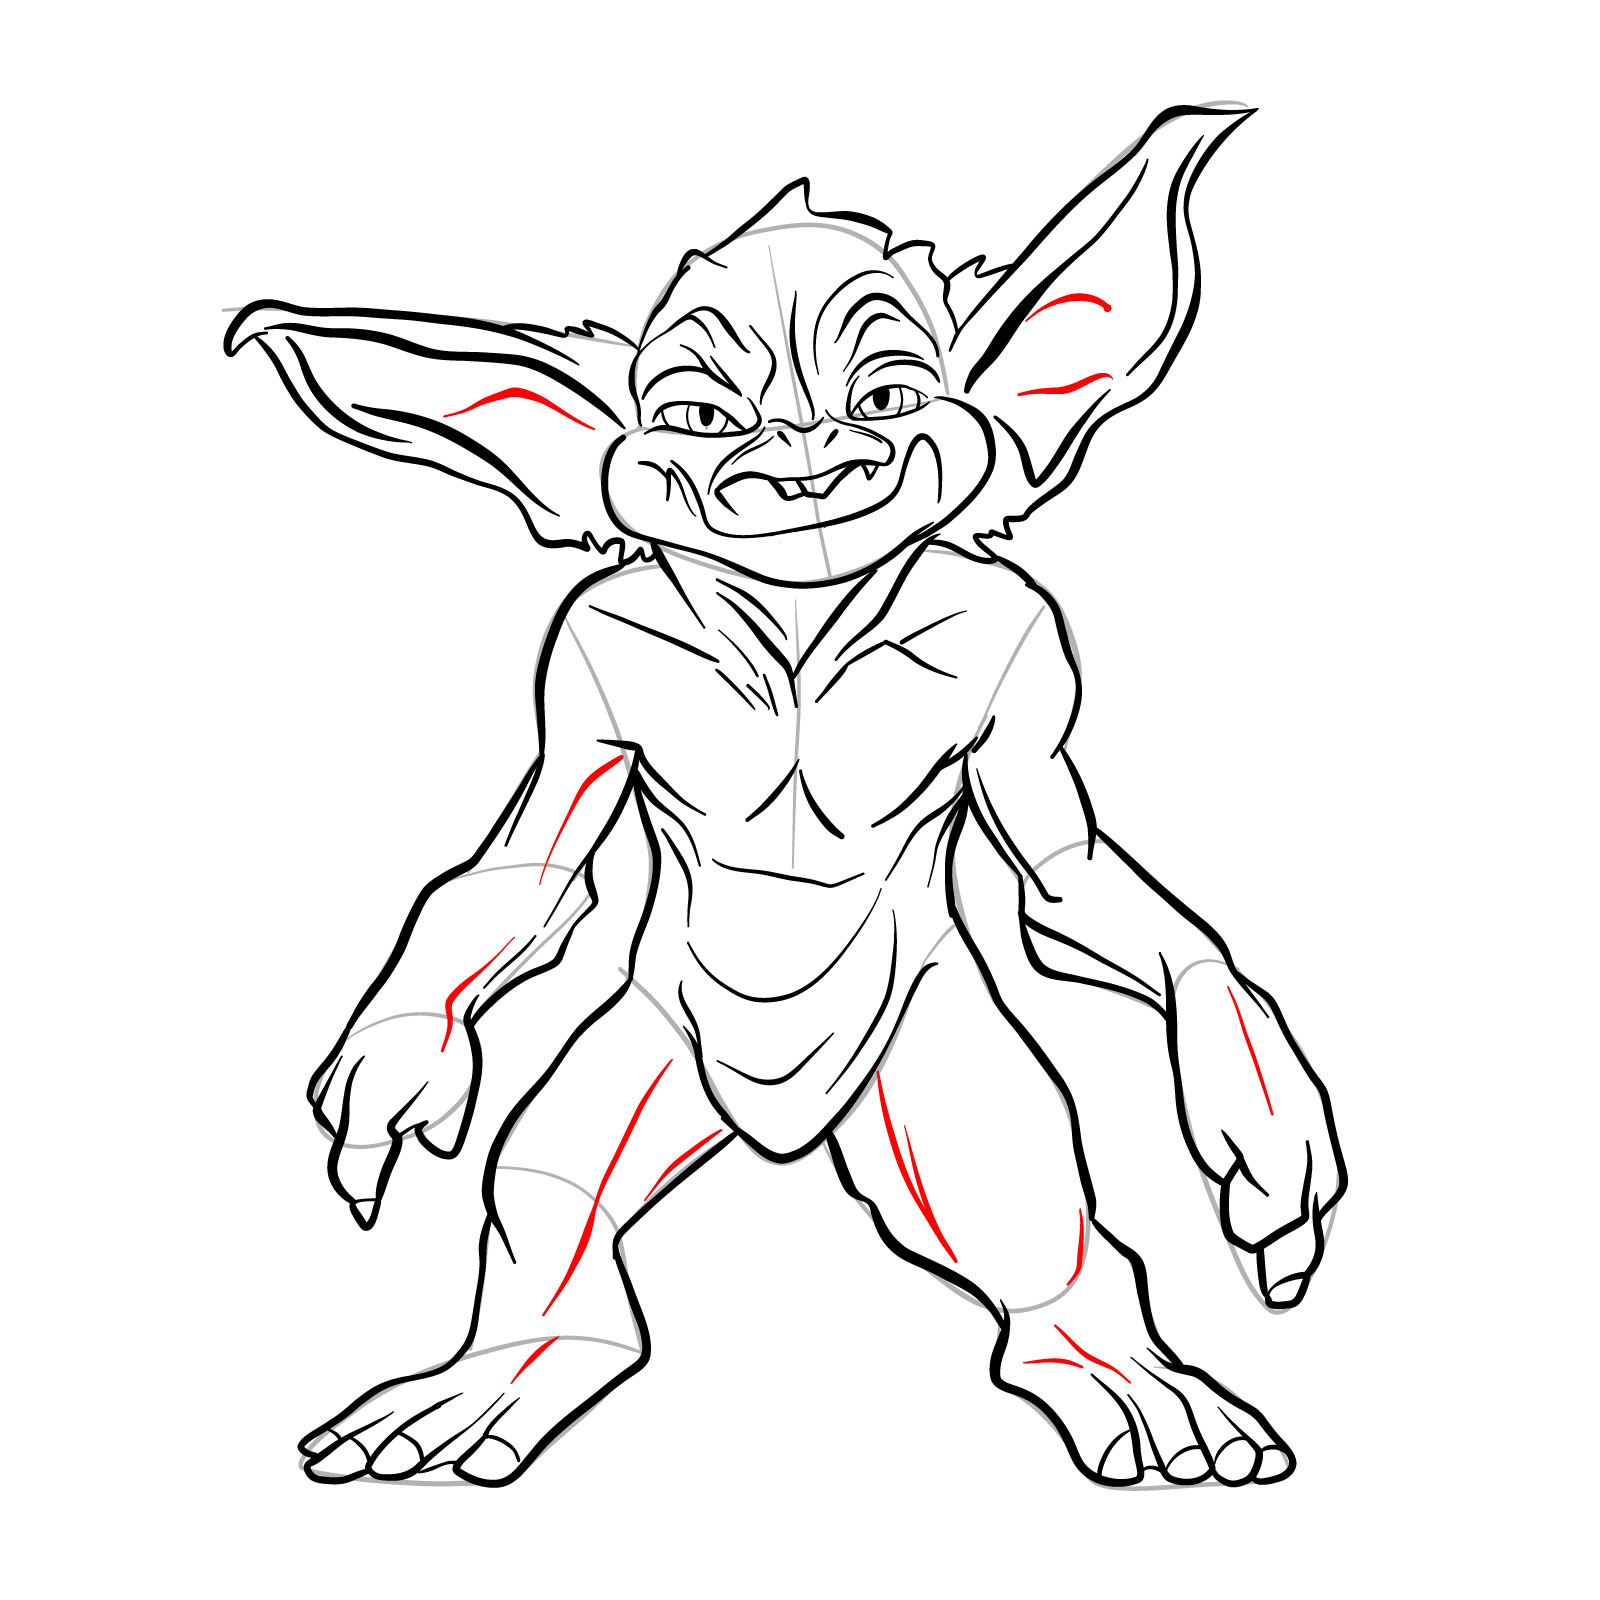 How to draw a Goblin - step 31